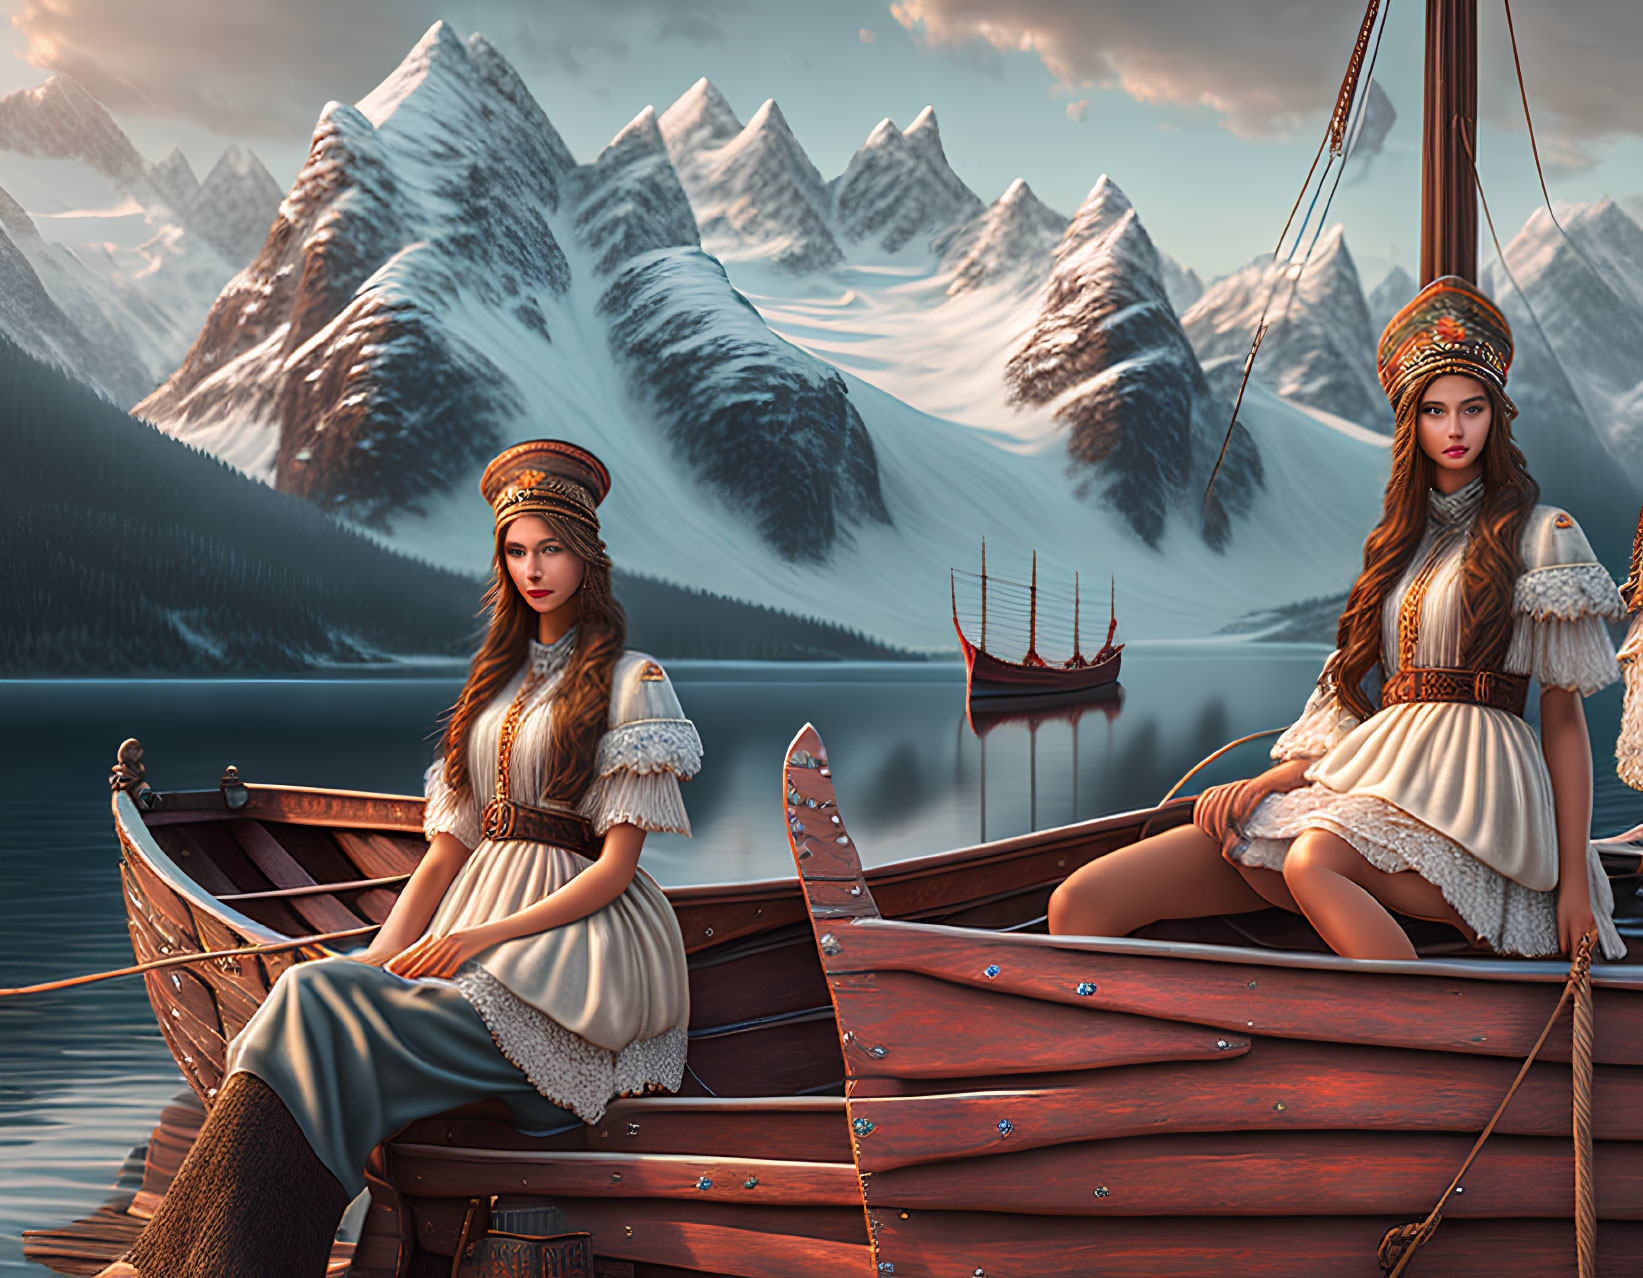 Two Women in Traditional Attire on Wooden Boat Amid Snowy Mountains